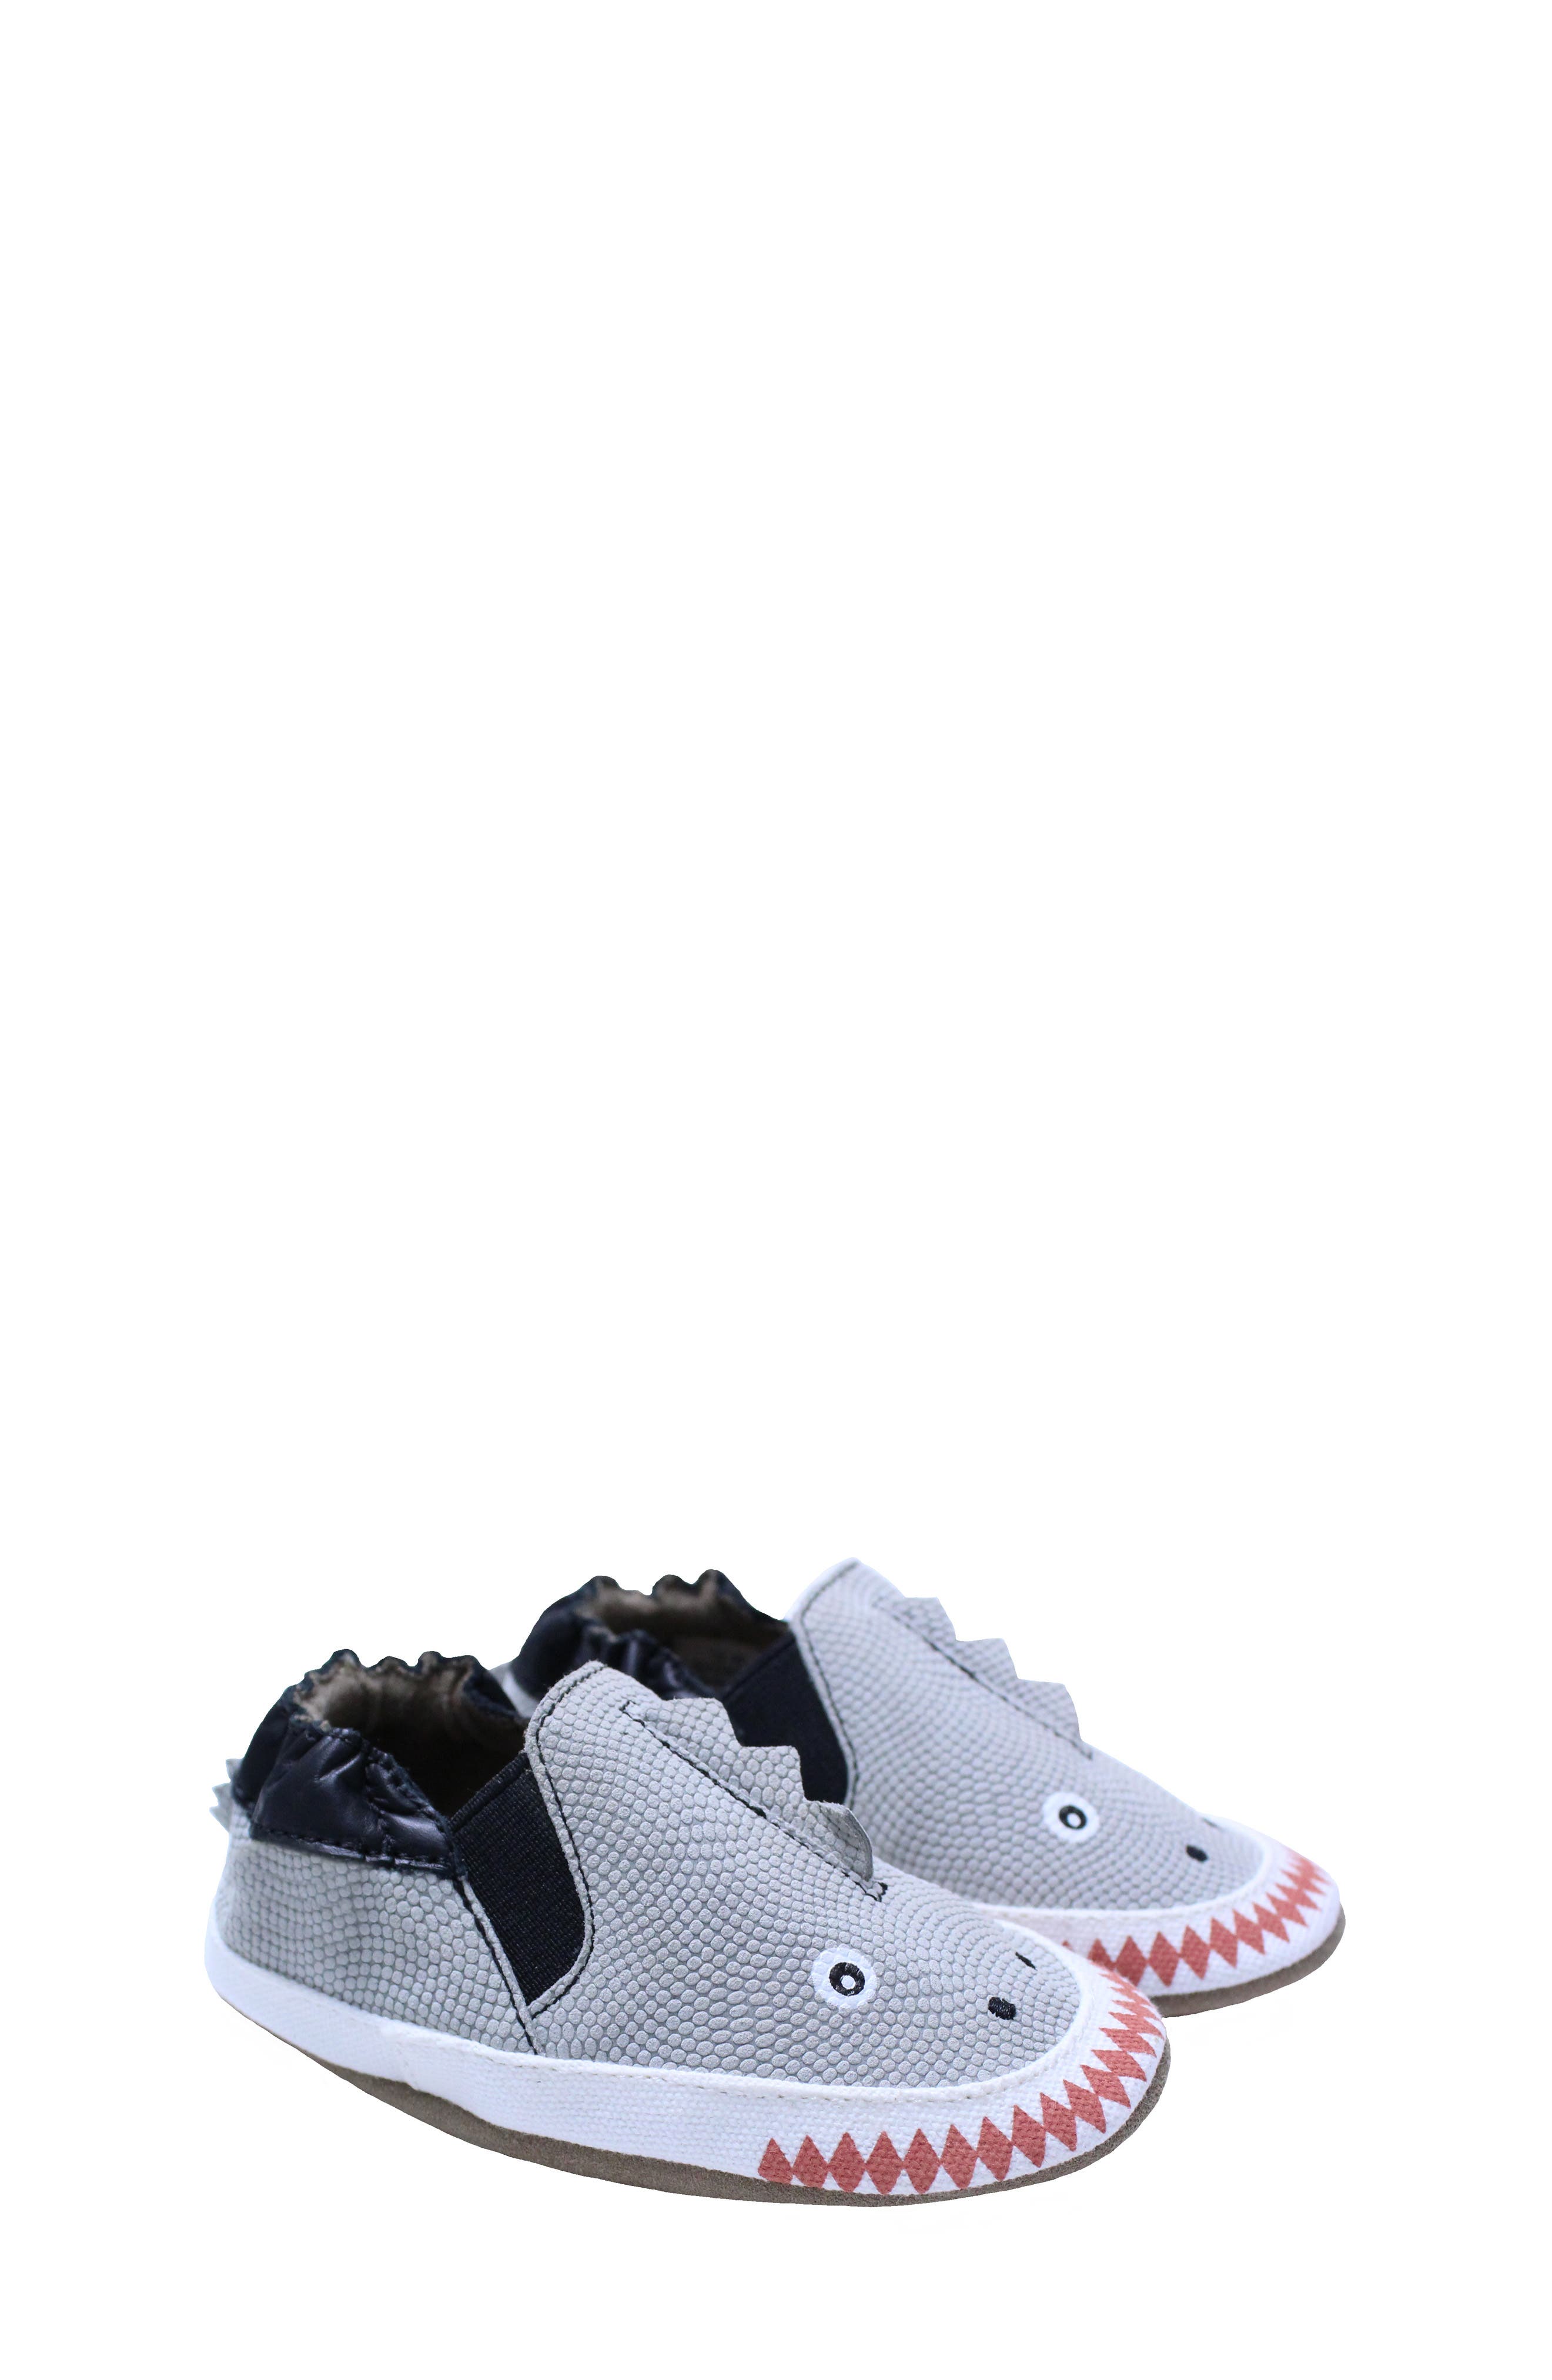 Baby's Shoes: First Walkers | Nordstrom